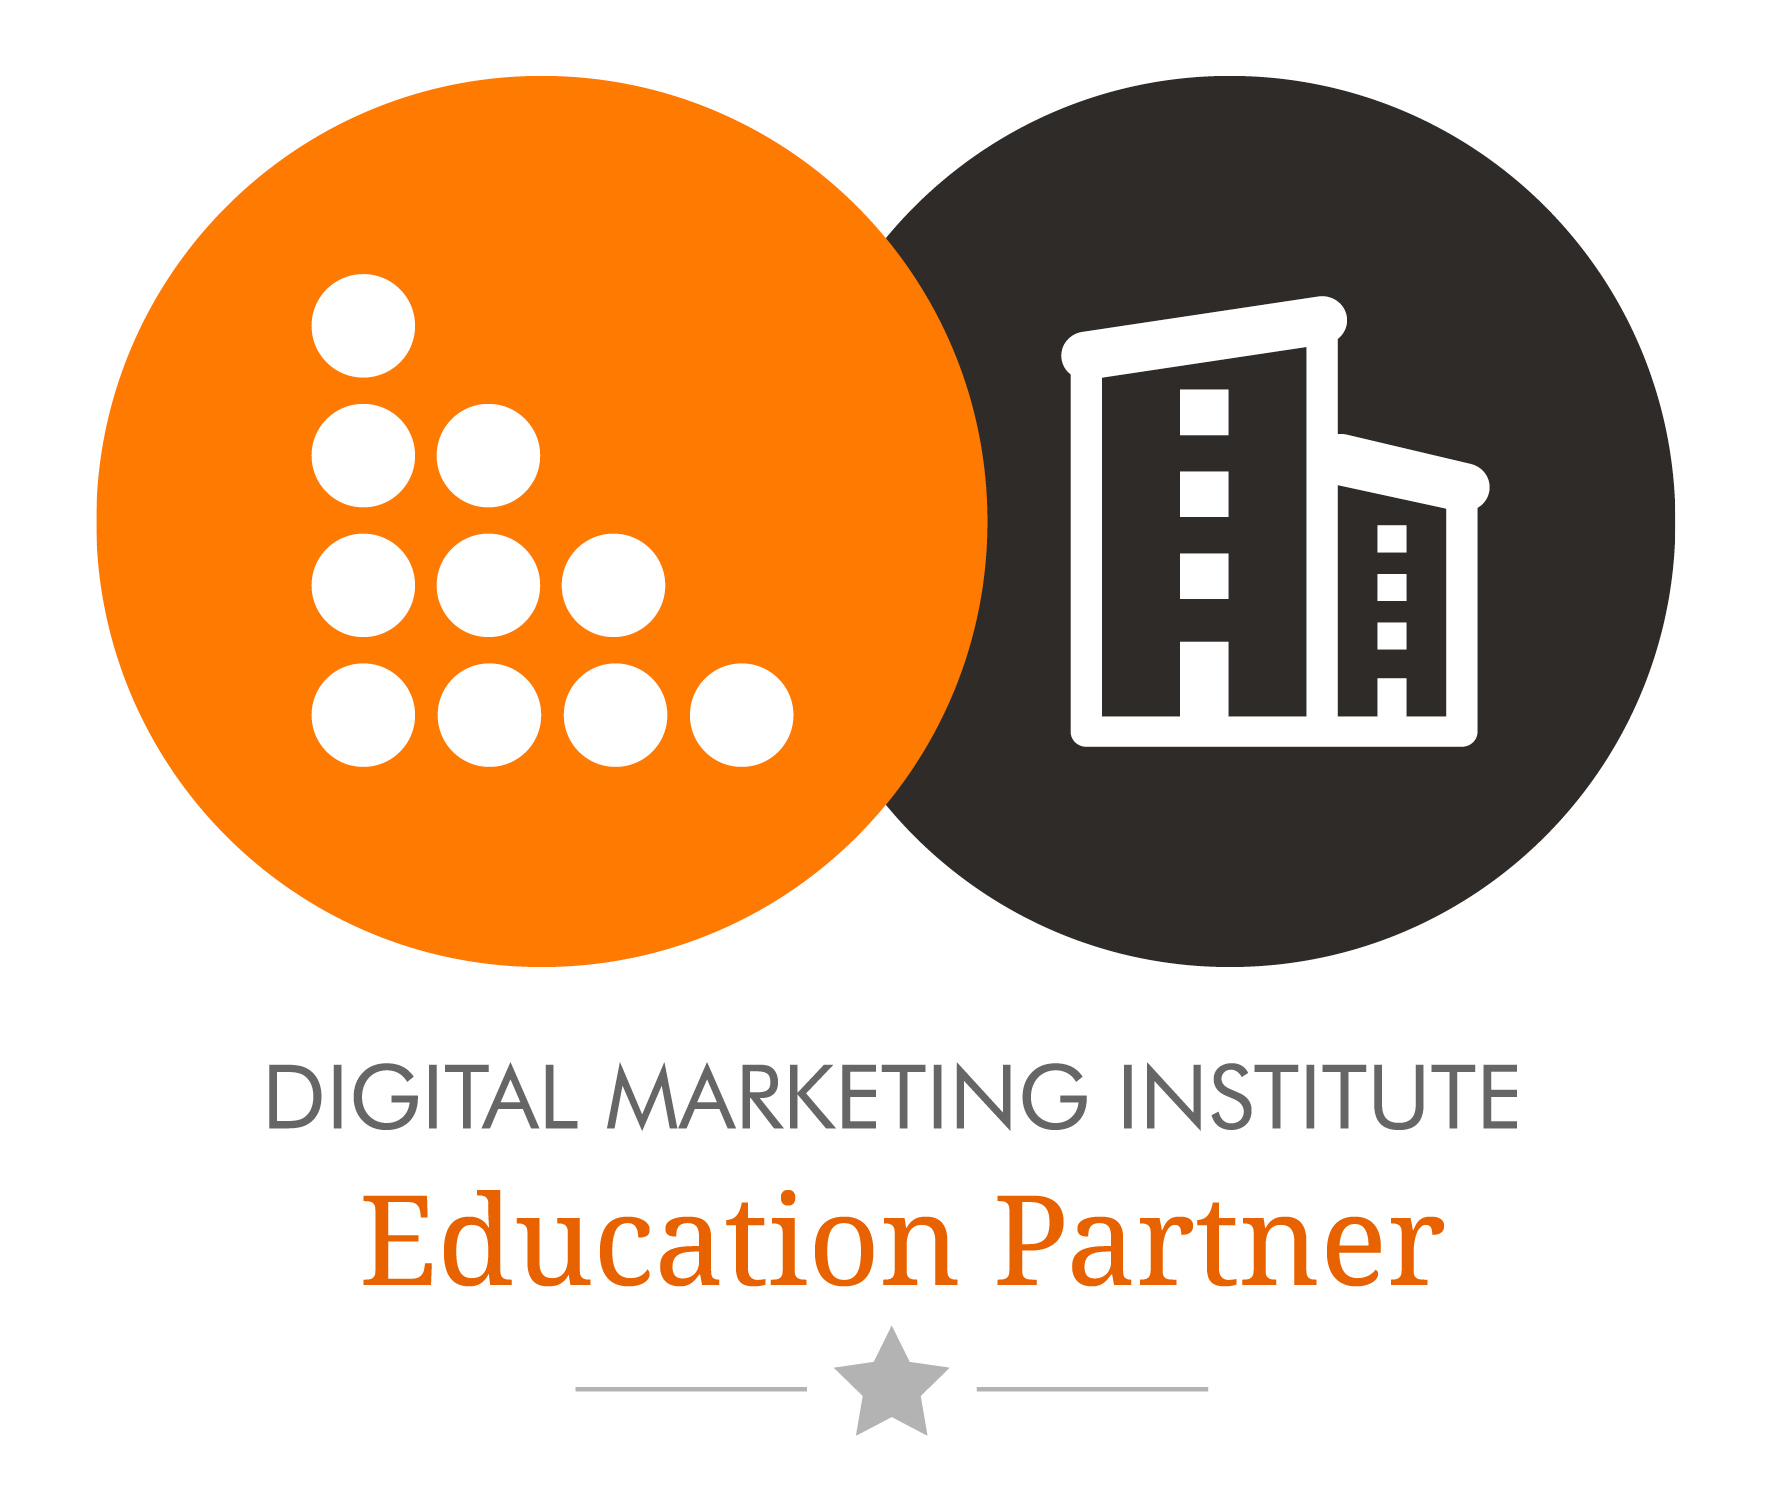 Learning Curve Appointed as Education Partner of the Digital Marketing Institute